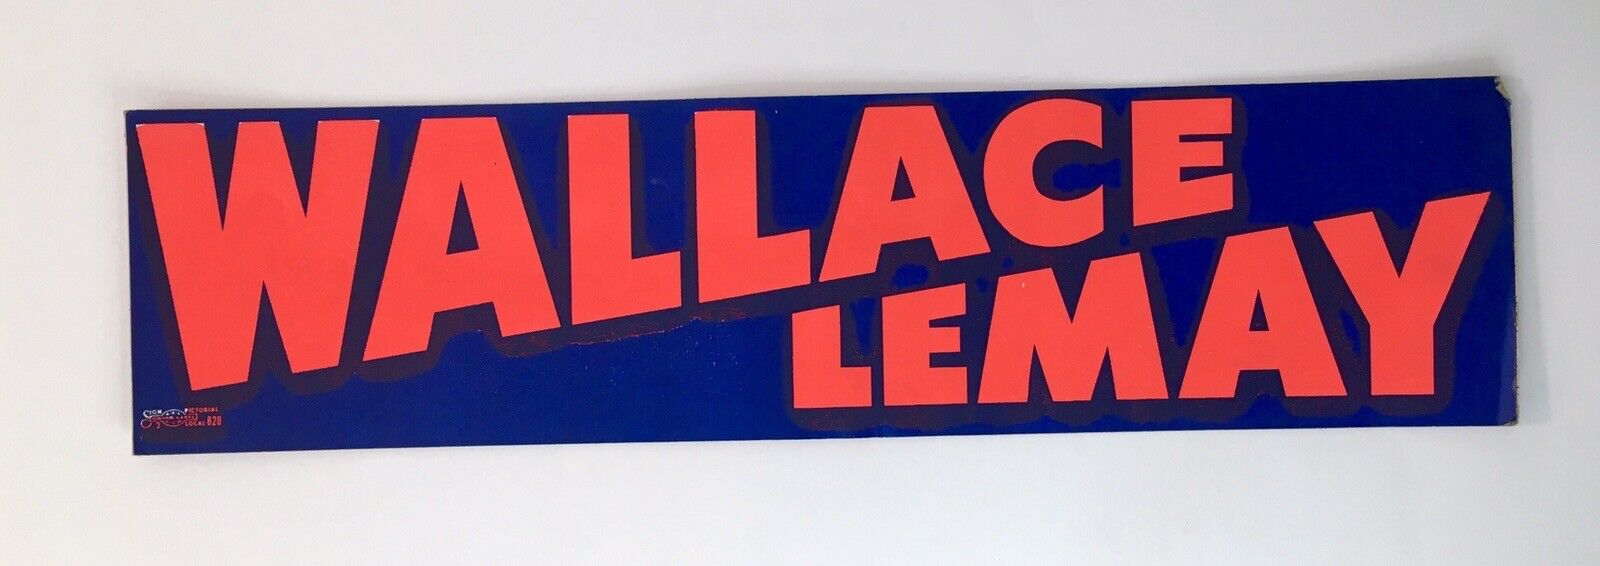 Vintage Wallace & Lemay Presidential Campaign Bumper Sticker 1968